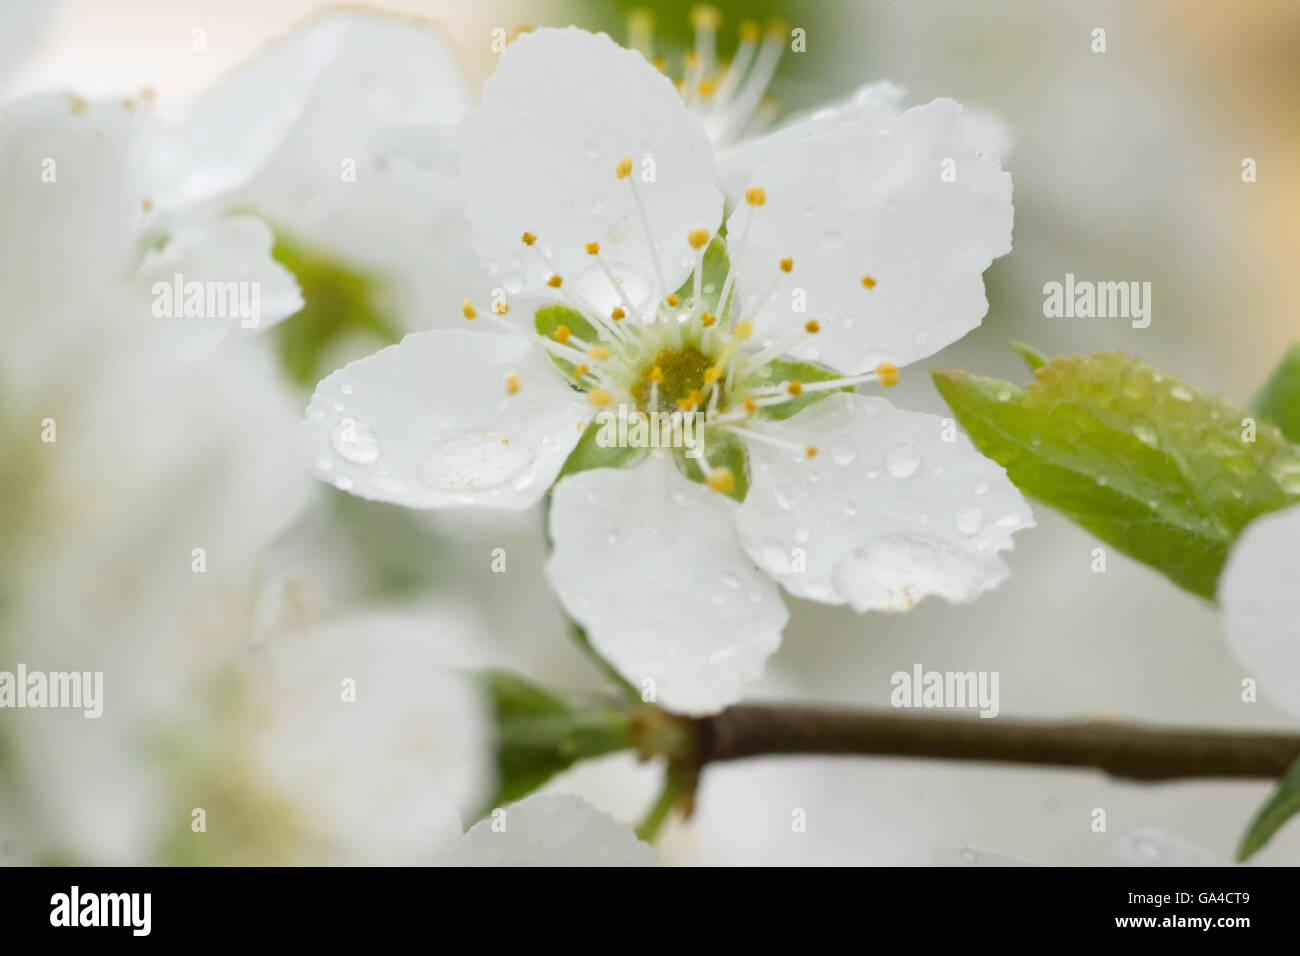 They bloom white flowers on the branches of a pear tree Stock Photo